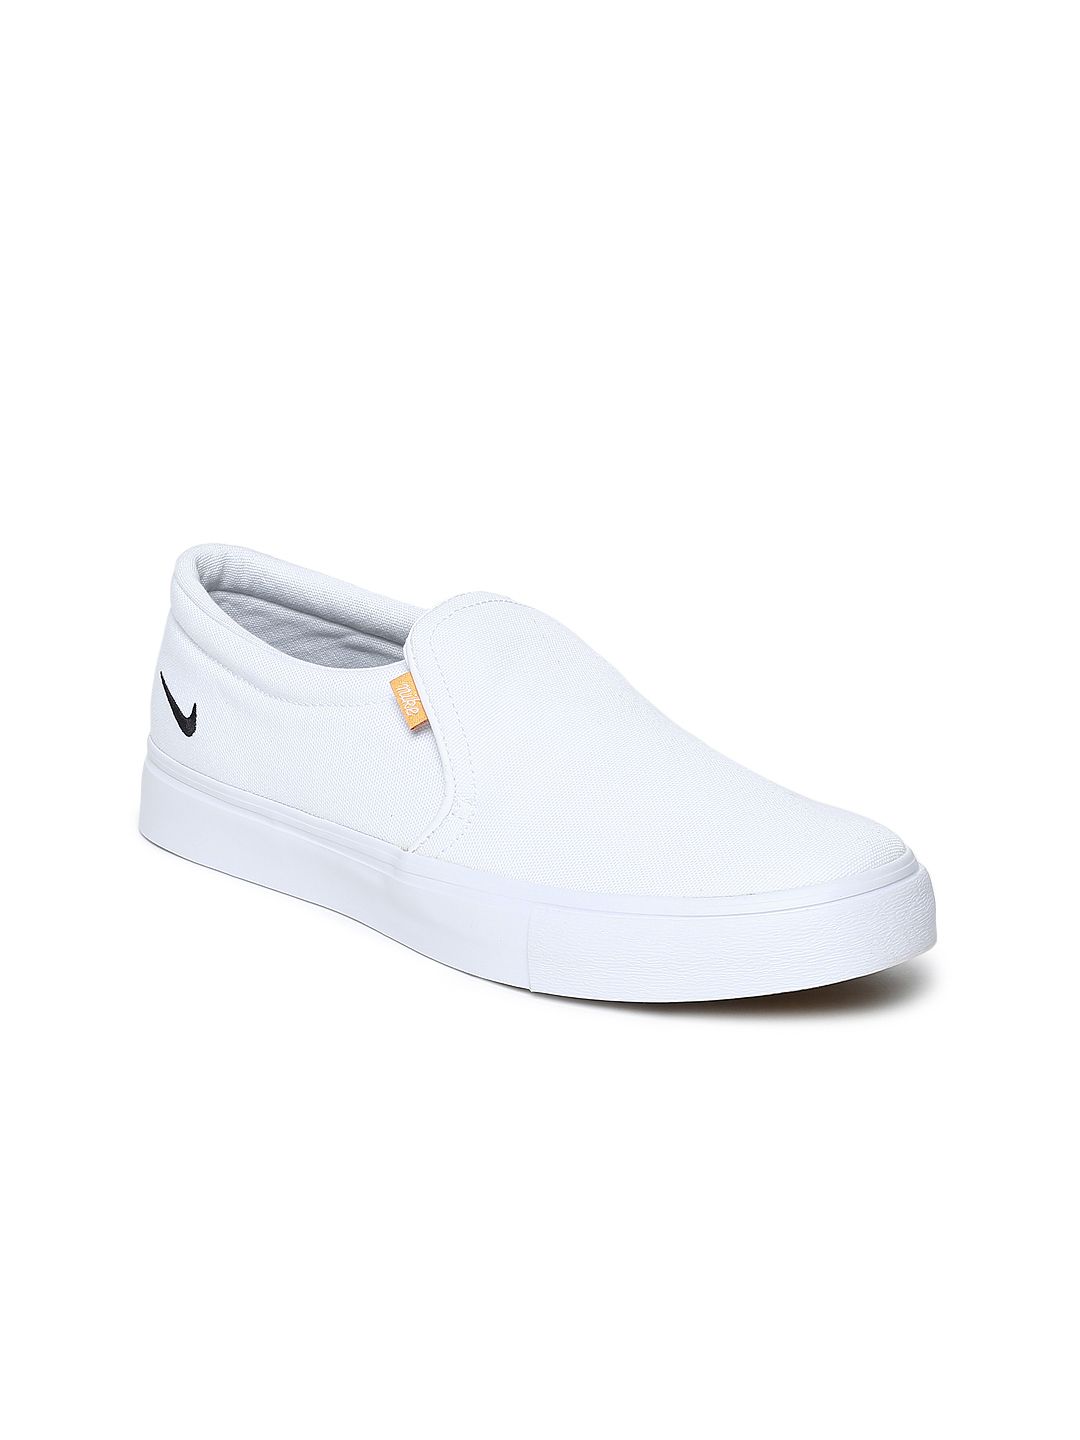 NIKE Women White COURT ROYALE AC Slip-On Sneakers Price in India